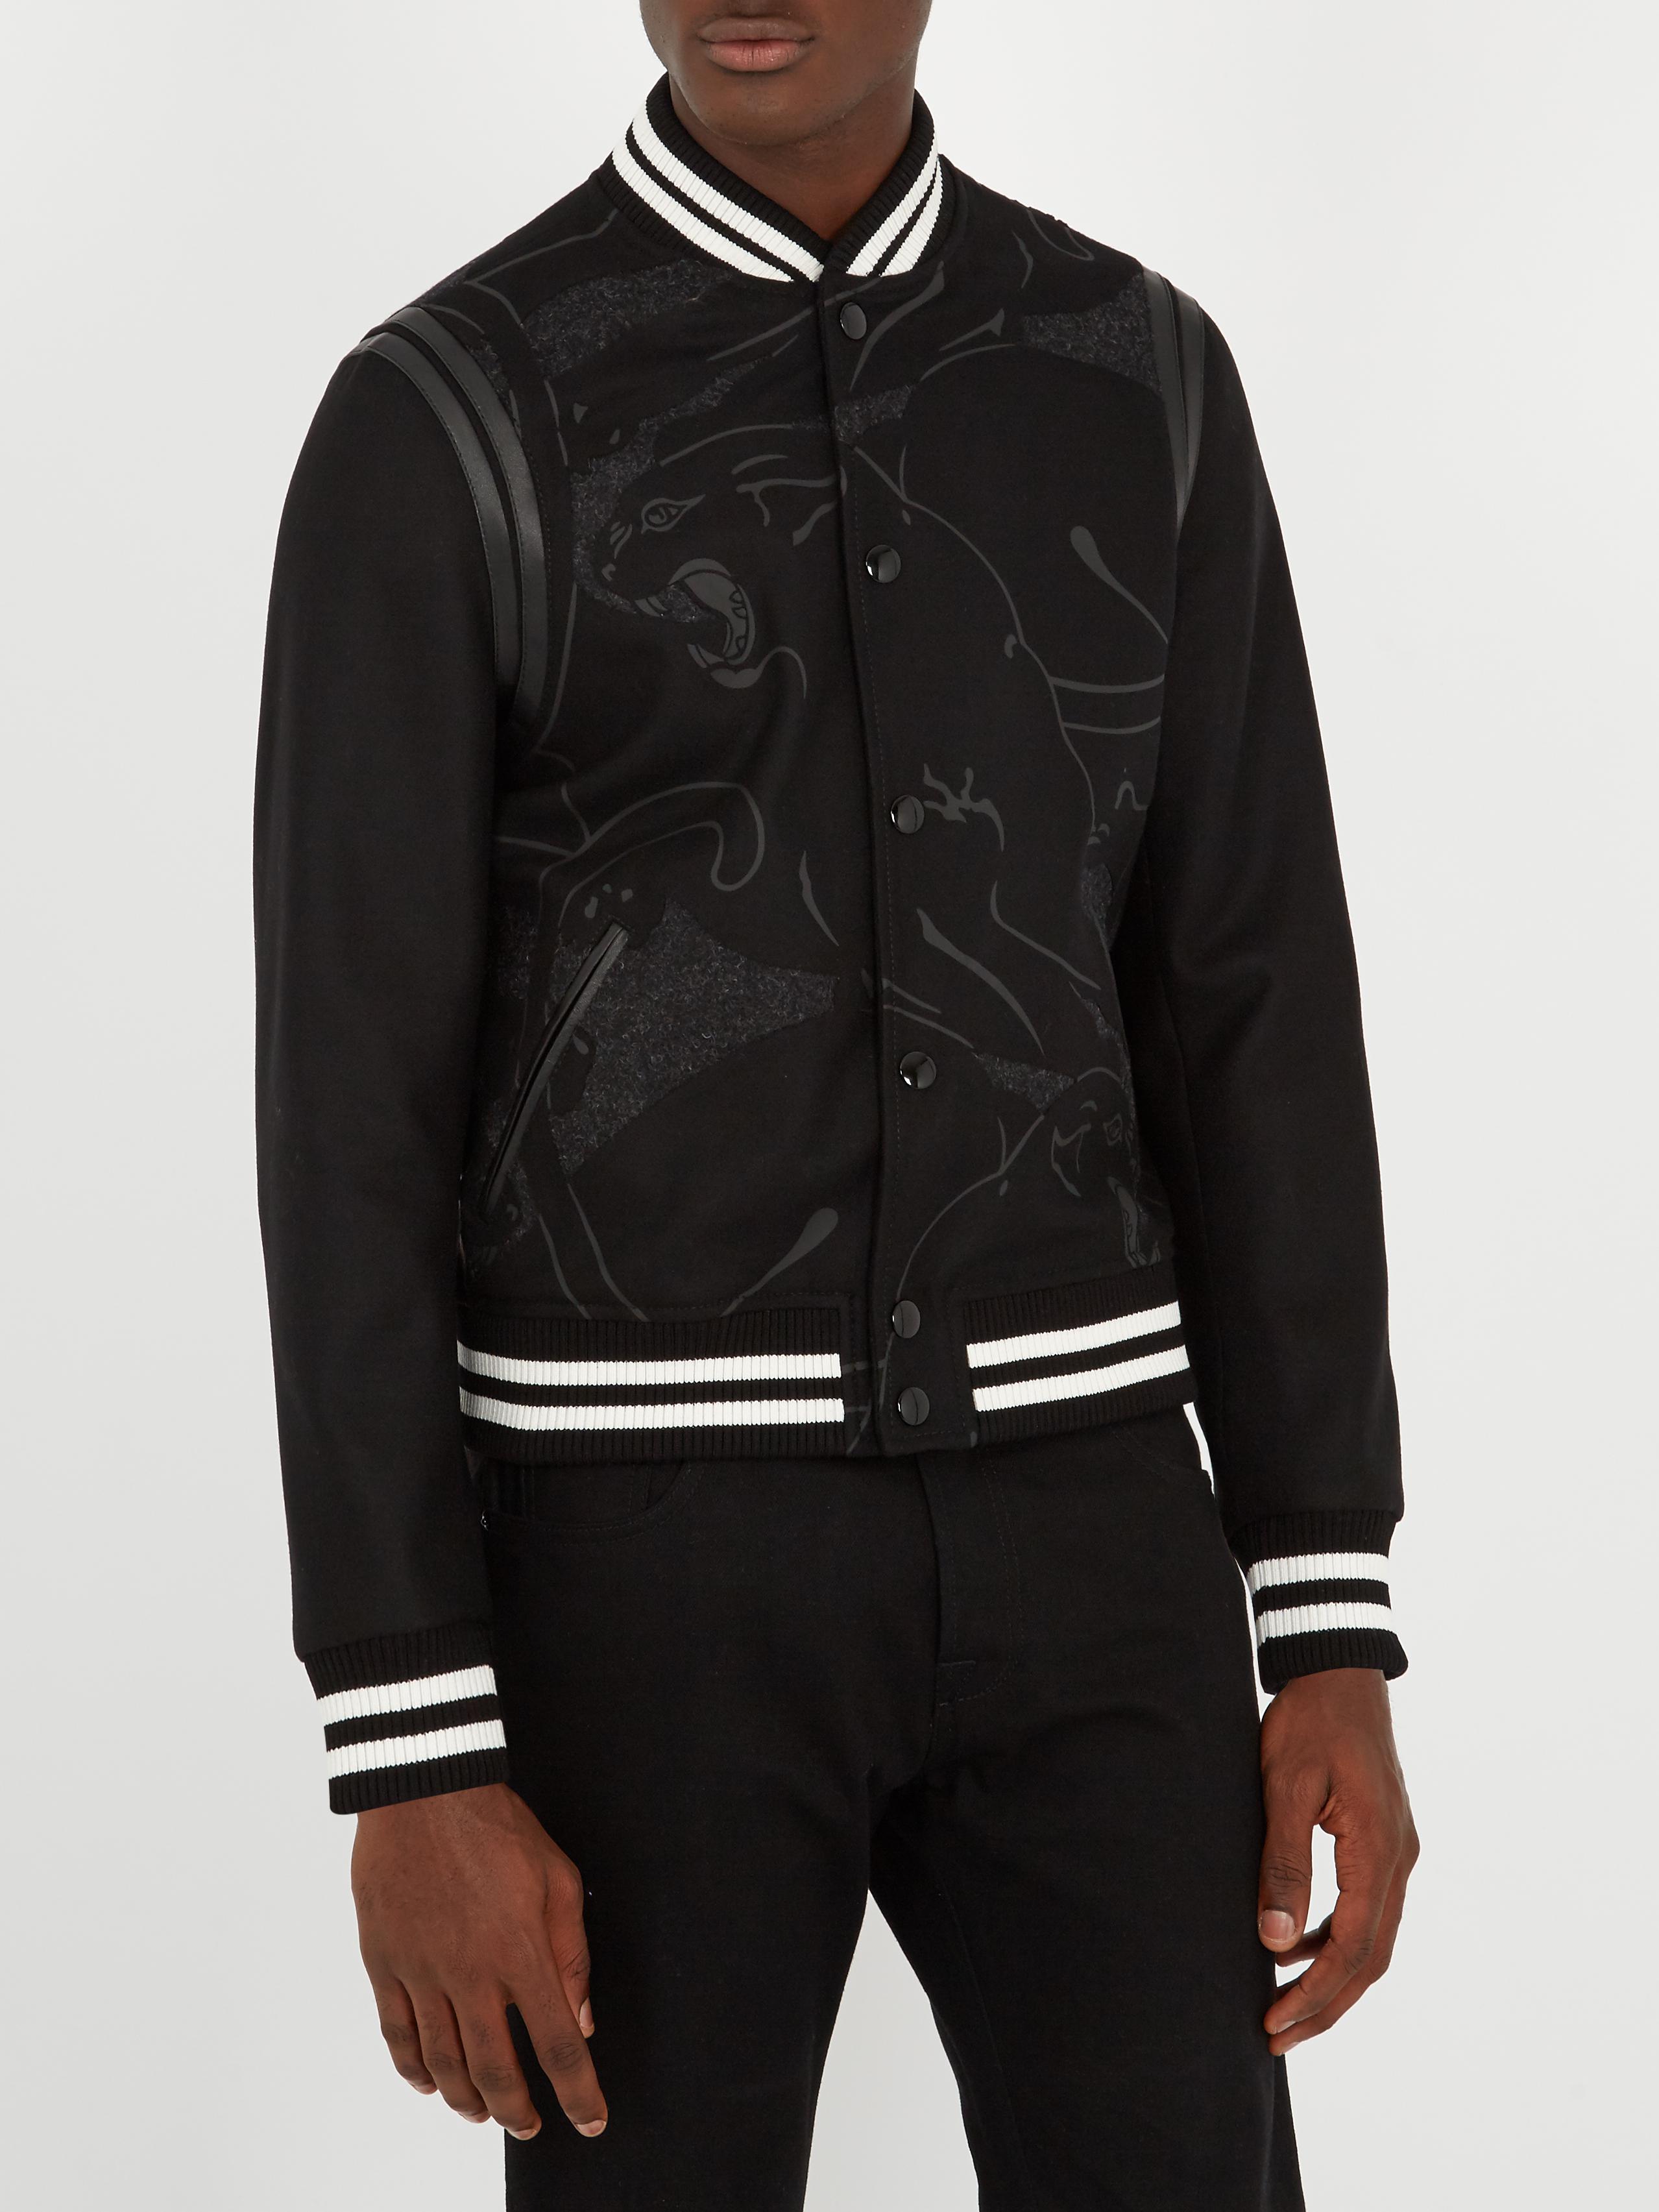 Valentino Panther-print Wool Varsity Jacket in Black for Men - Lyst